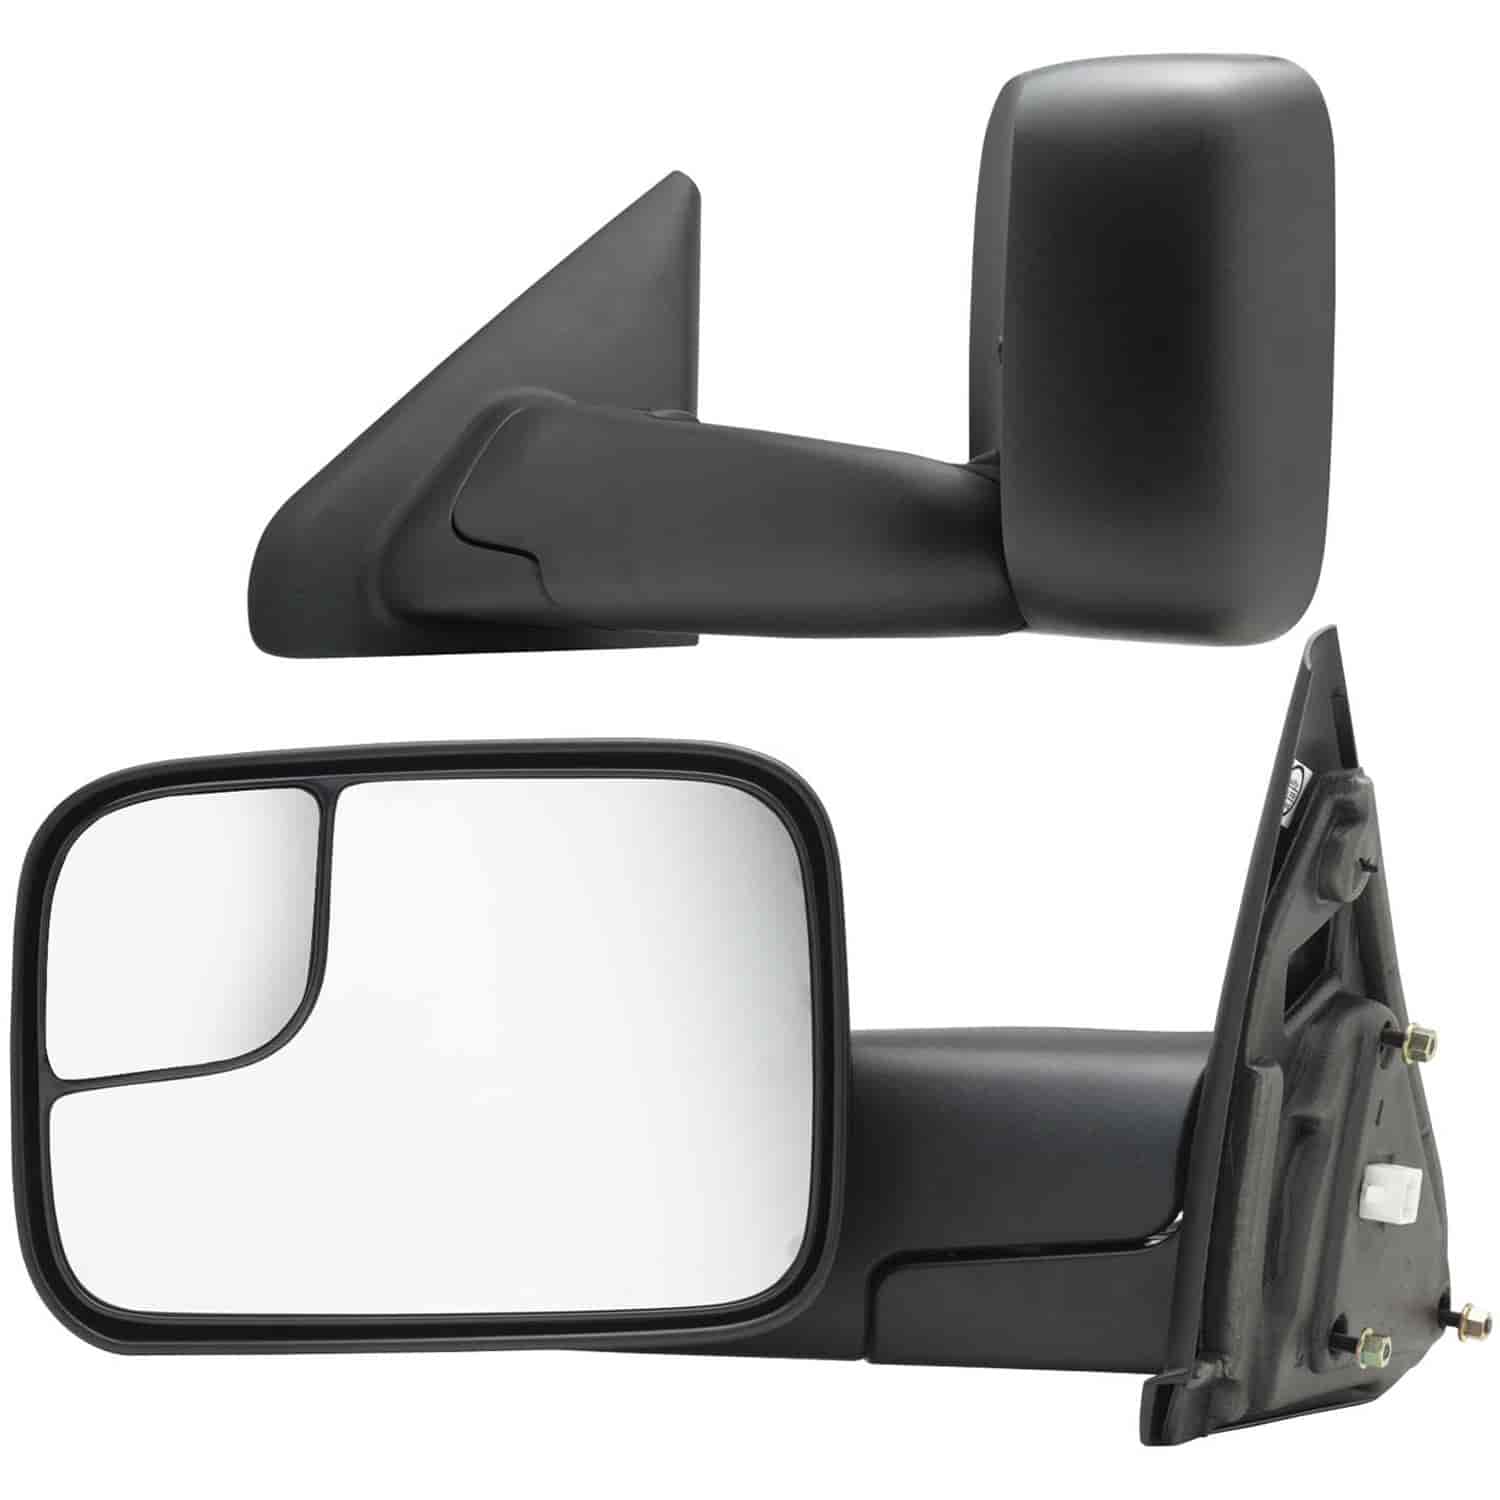 OEM Style Replacement mirror set for 02-08 1500 03-09 2500/ 3500 Dodge Ram Pick-Up w/towing pkg spot